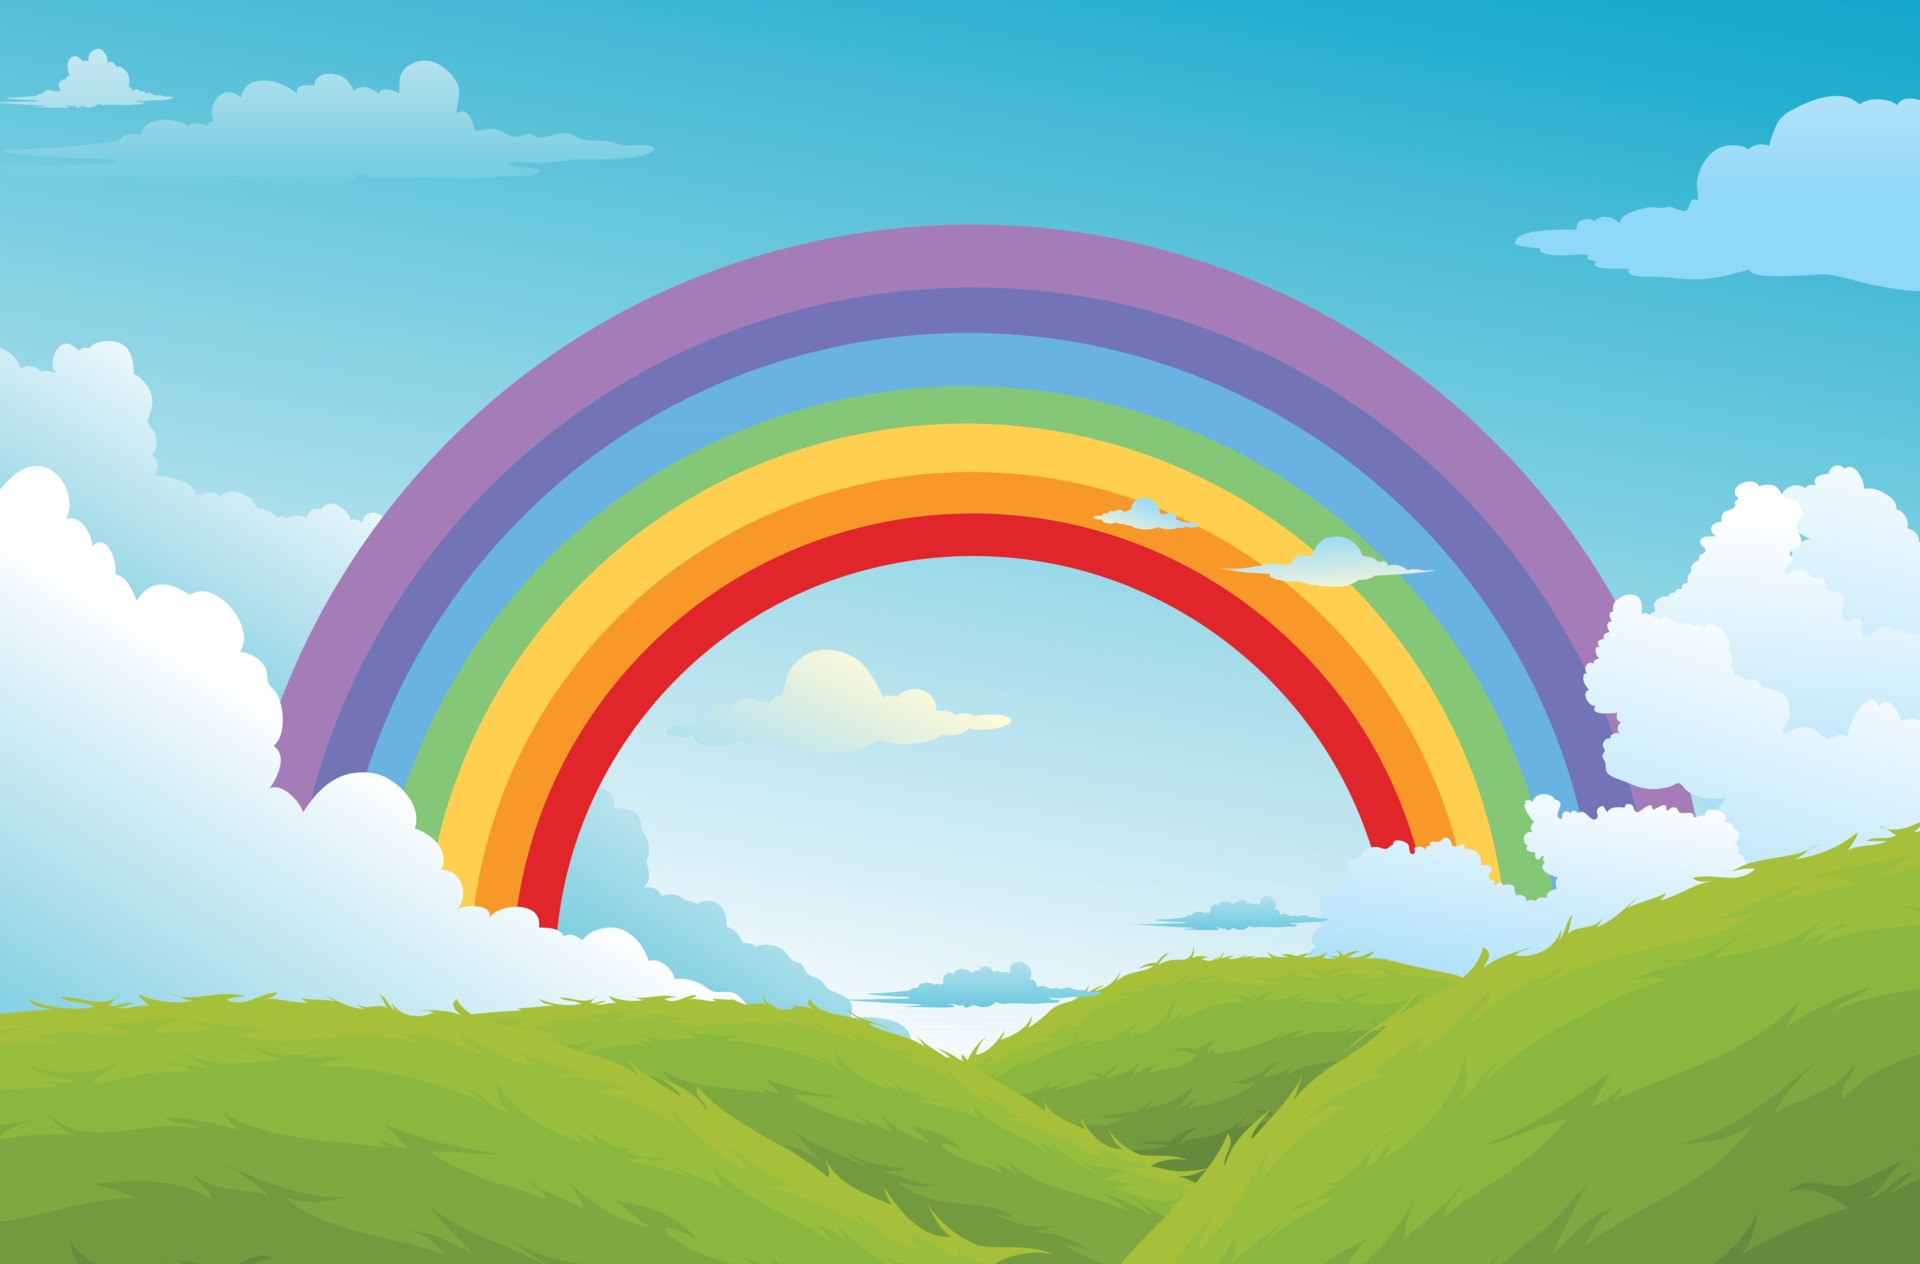 Rainbow And Clouds In The Sky Background Vector Art At Vecteezy